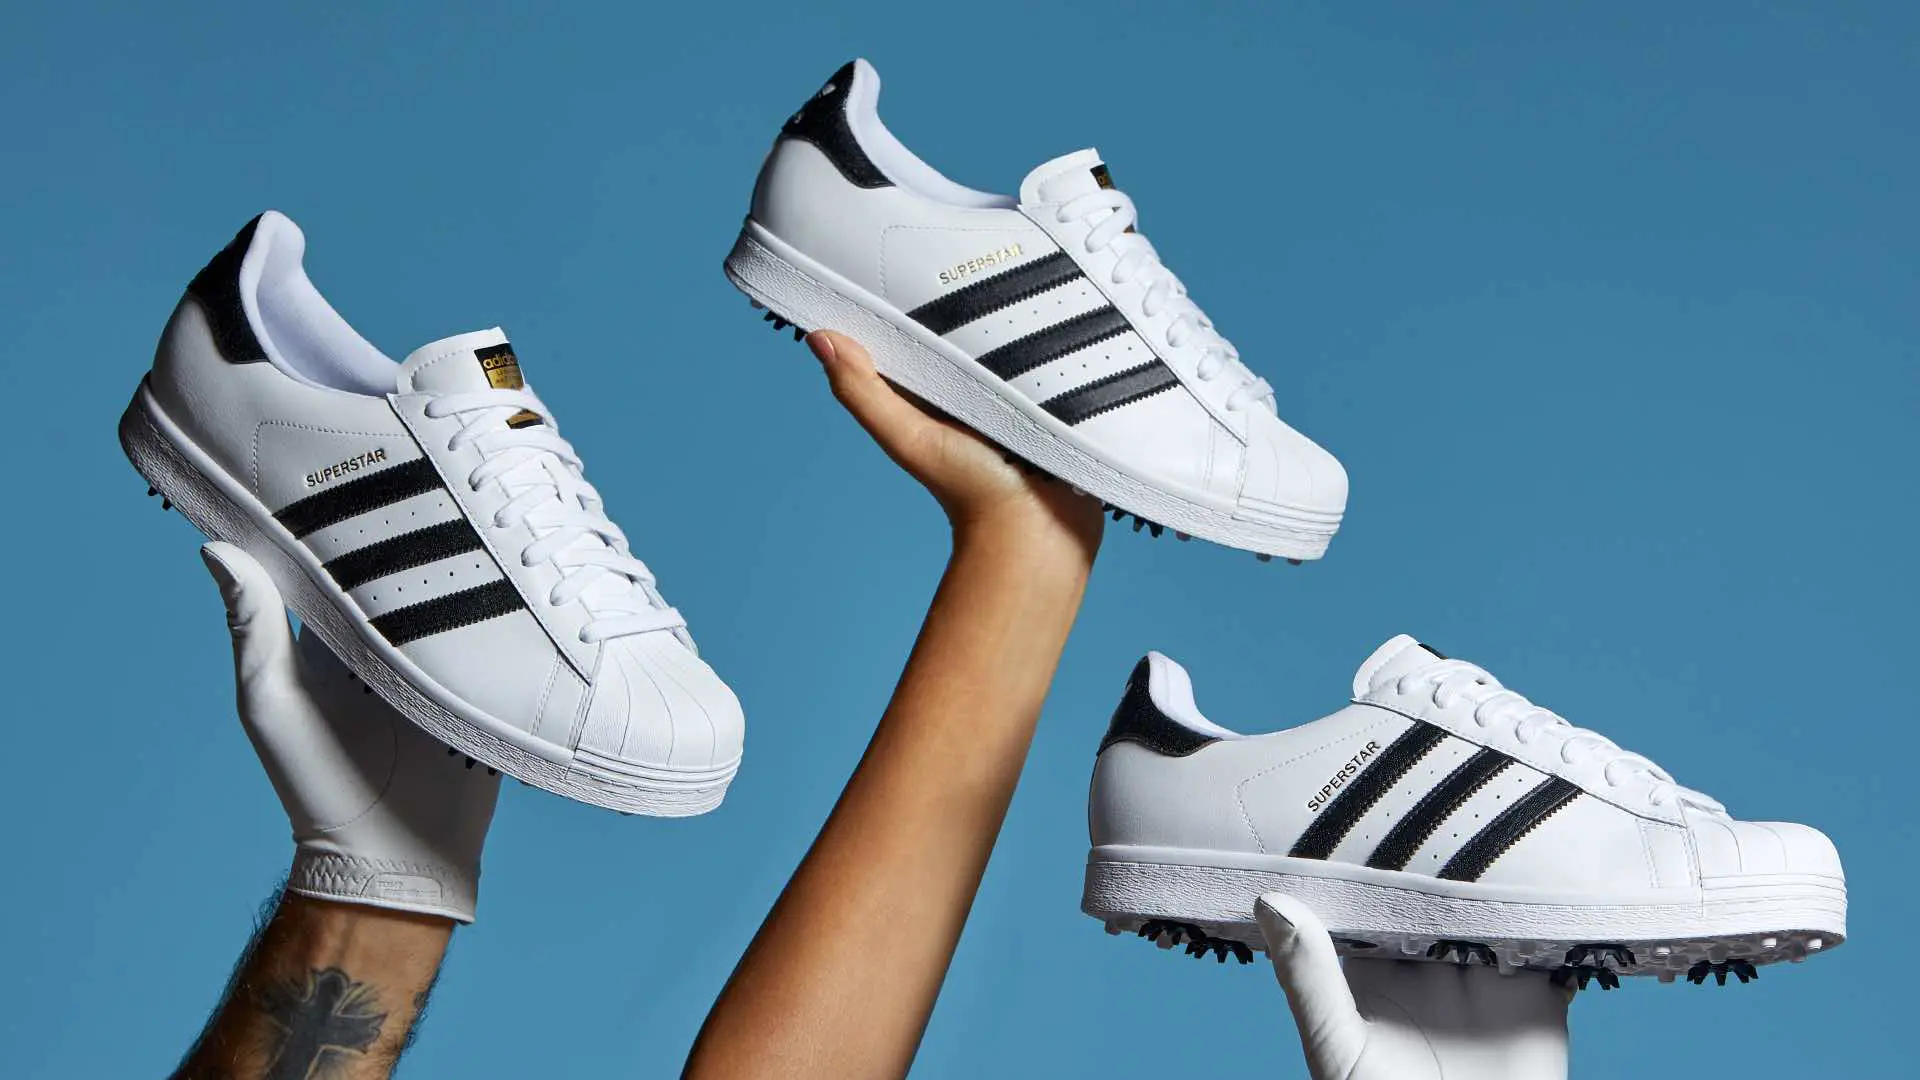 Adidas superstar limited edition brings iconic 3-stripes footwear to the course